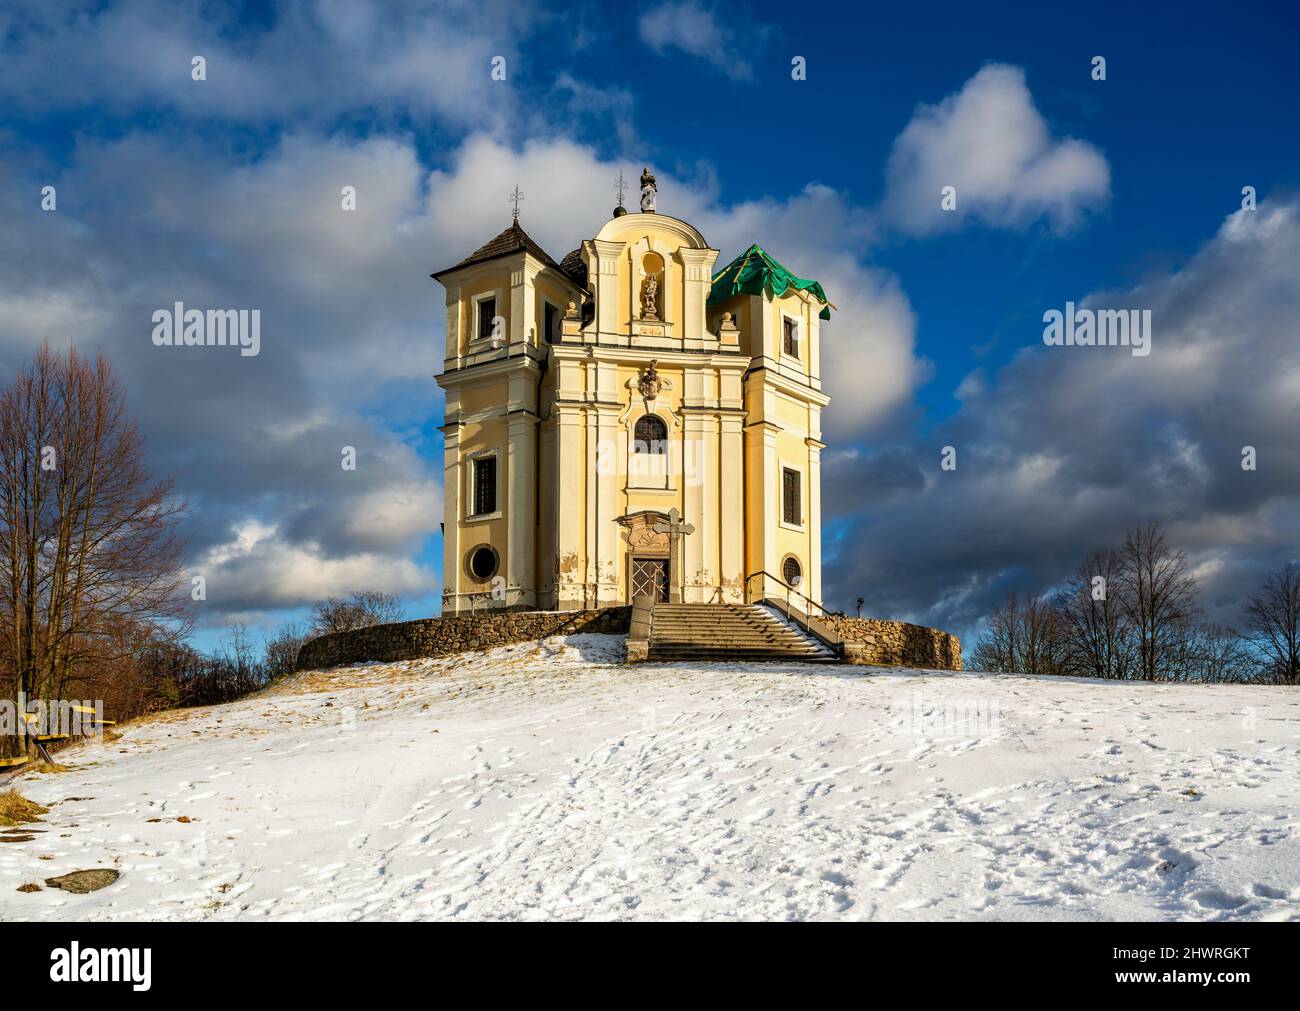 Baroque church of St. John the Baptist and the Virgin Mary, place of pilgrimage on Poppy hill in winter sunny day. Smolotely, Czech republic. Stock Photo